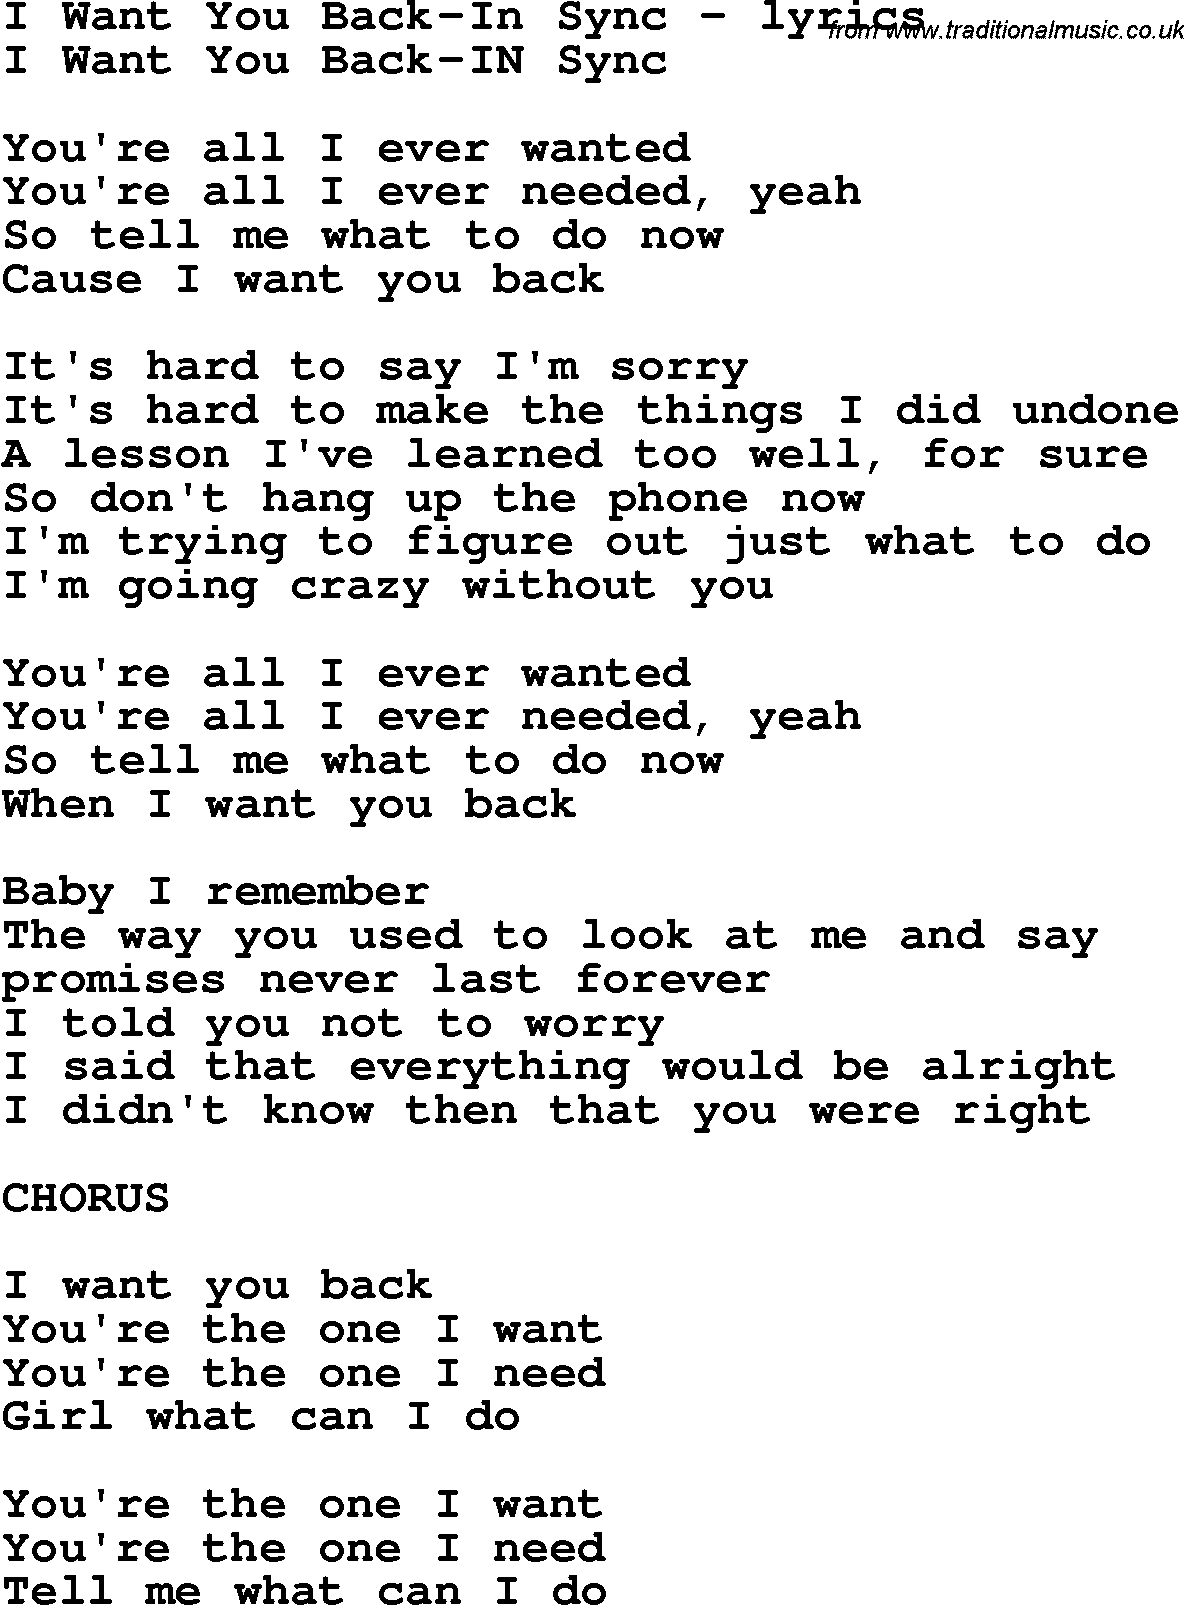 Love Song Lyrics for: I Want You Back-In Sync